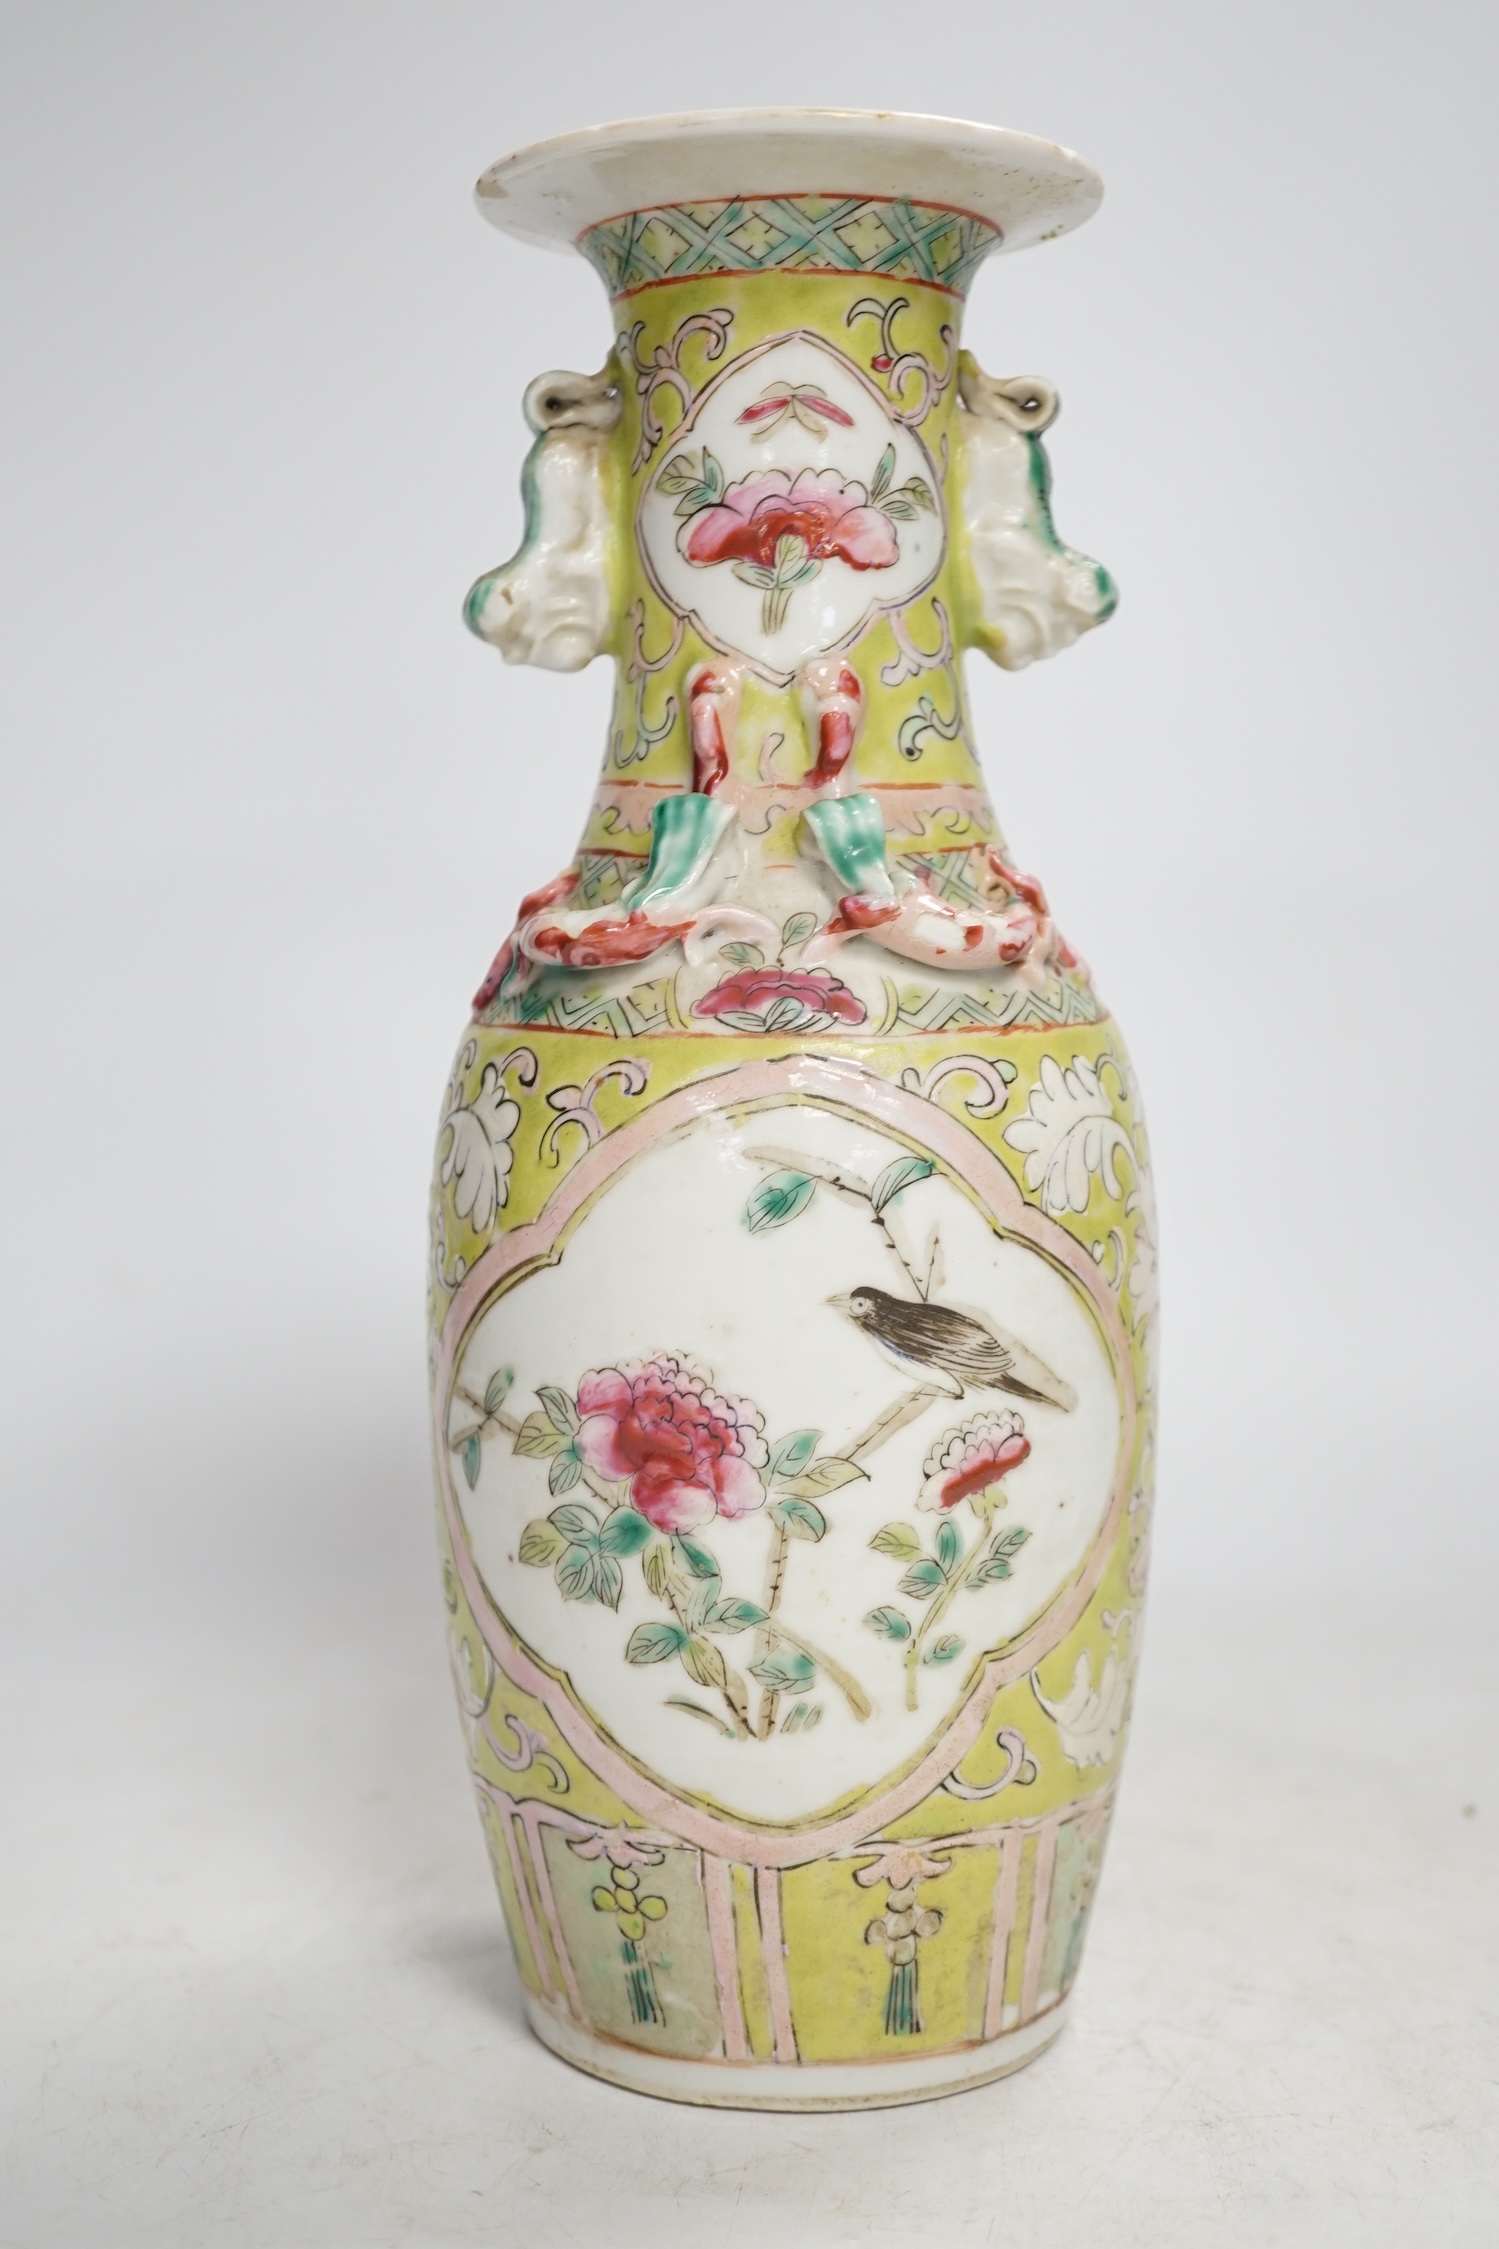 A 19th century Chinese vase, for the Malaysian Straits market, 25cm high. Condition - some minor chips to neck lip, fair